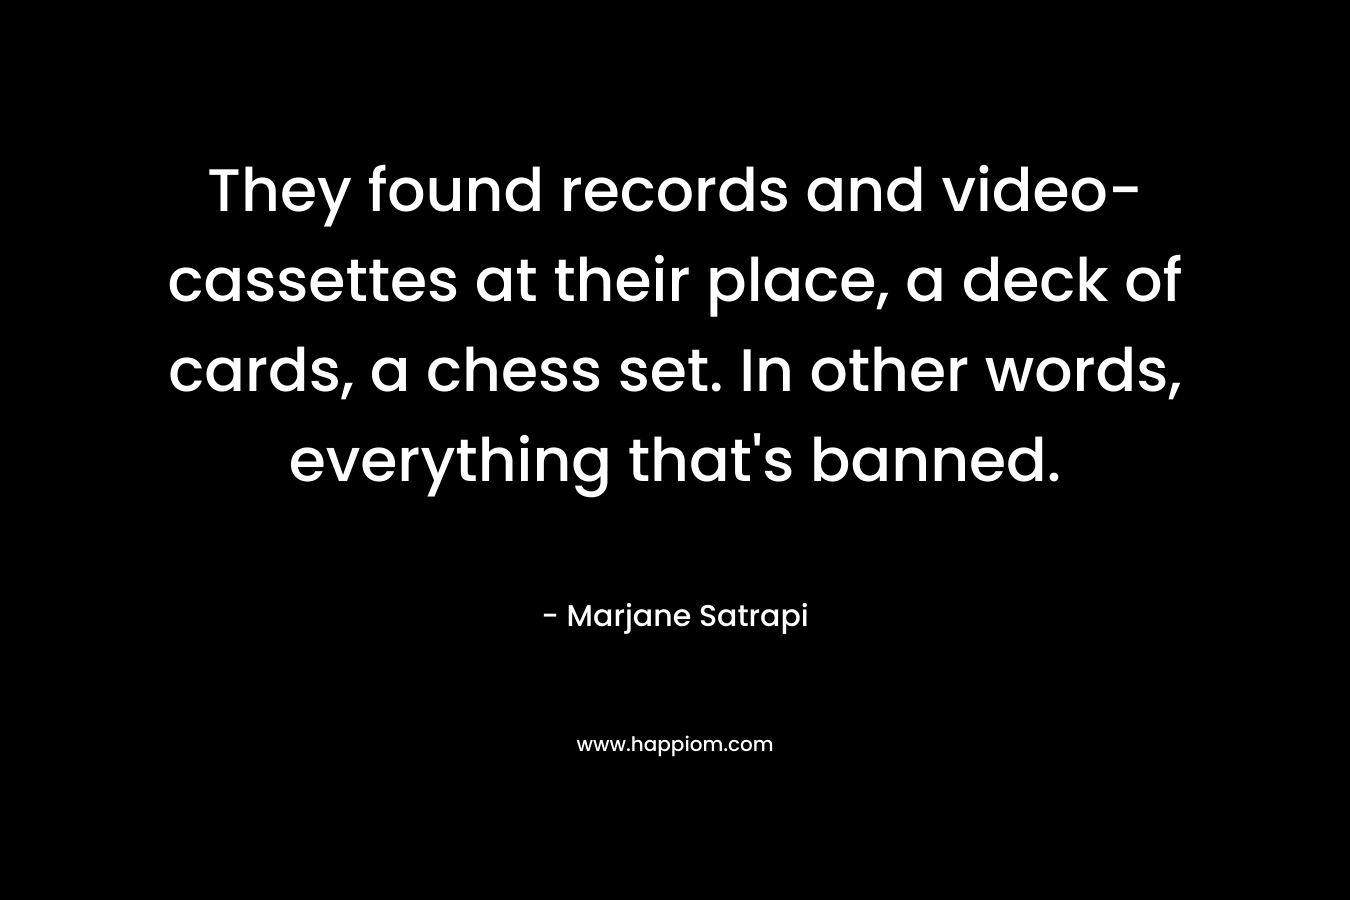 They found records and video-cassettes at their place, a deck of cards, a chess set. In other words, everything that’s banned. – Marjane Satrapi